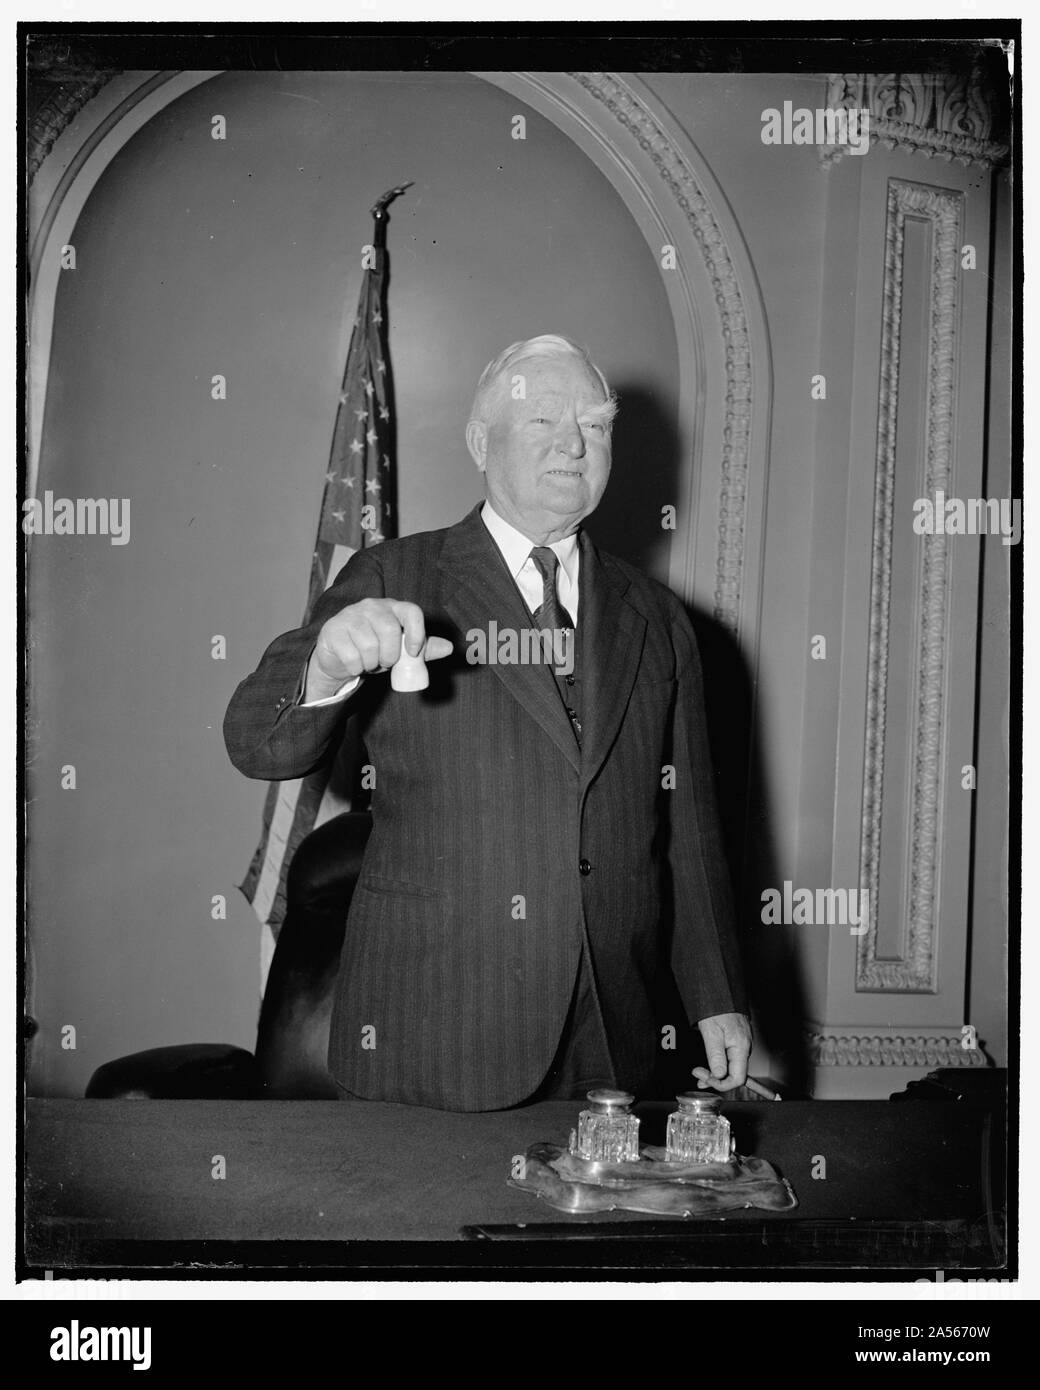 Vice President ready for opening. Washington, D.C., Dec. 29. A sure sign that Congress is ready to convene on January 3. Vice President Garner posing, gavel in hand, on the rostrum in the Senate chamber, 12/29/38 Stock Photo